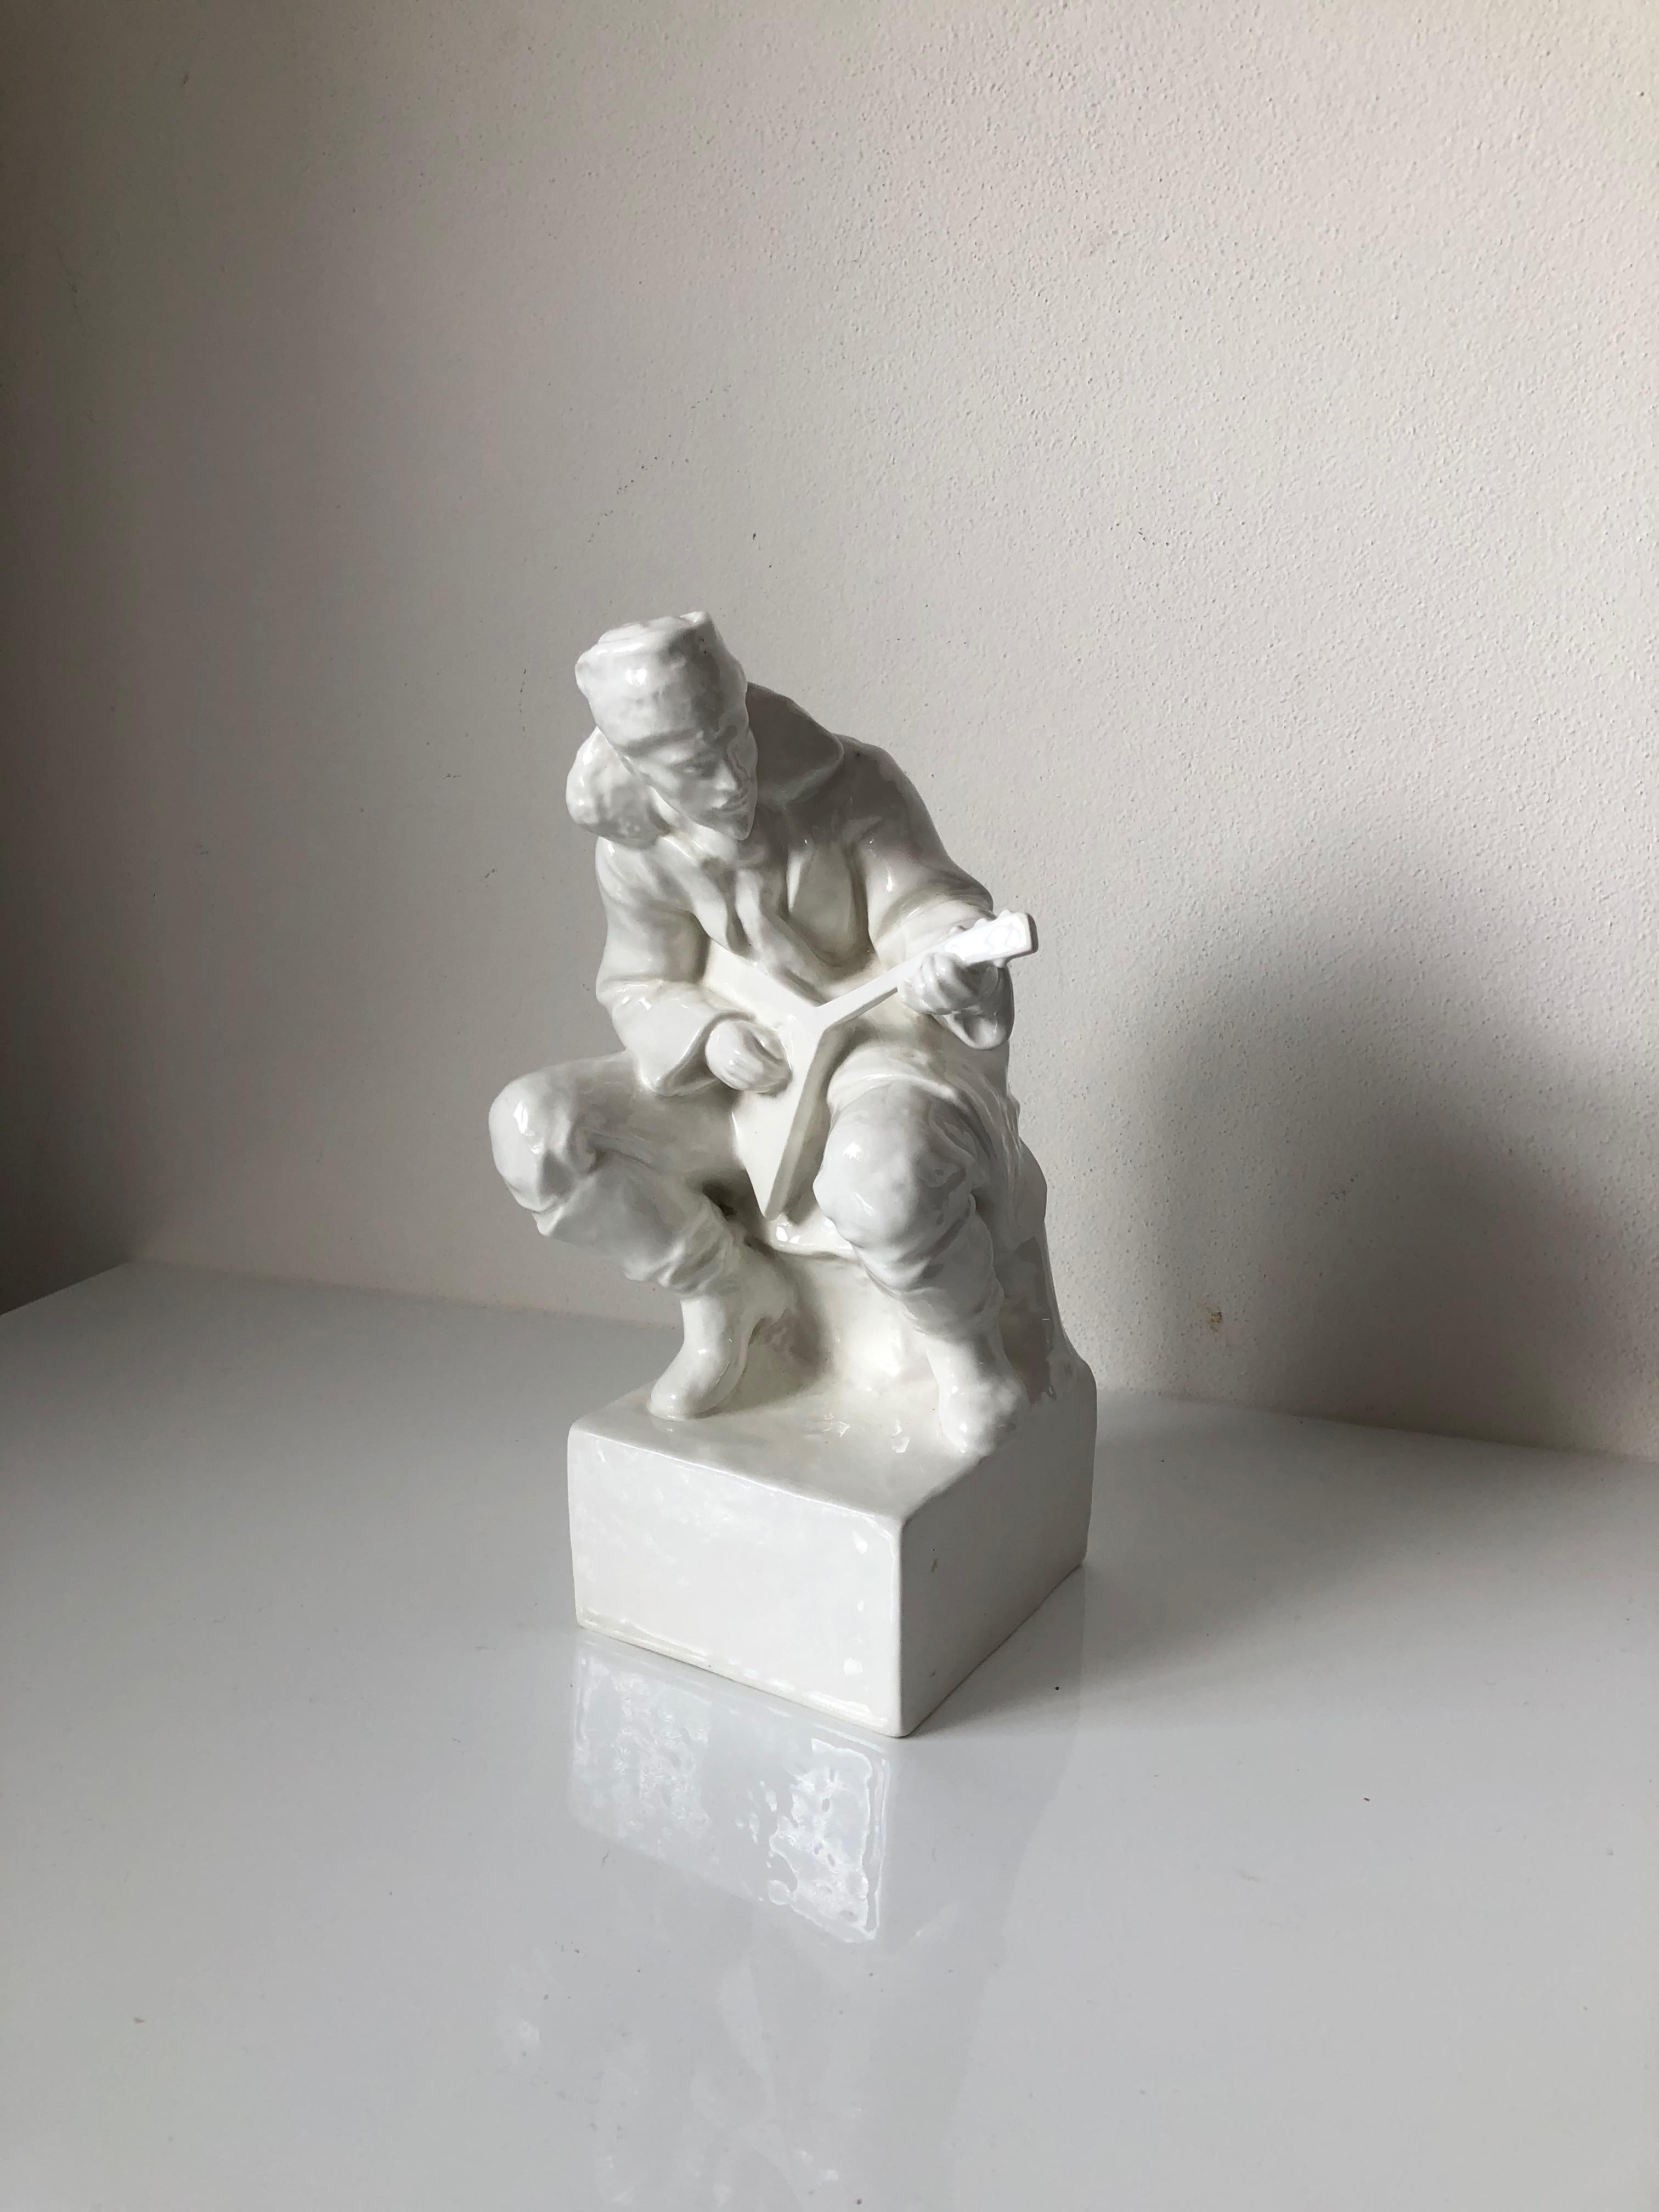 - Porcelain man playing the lute
- By Czechoslovakia factory RAKO,which no exists today(1883-2004)
- Figure is dated around 1930-1940
- Nice mantel piece, in very good condition.